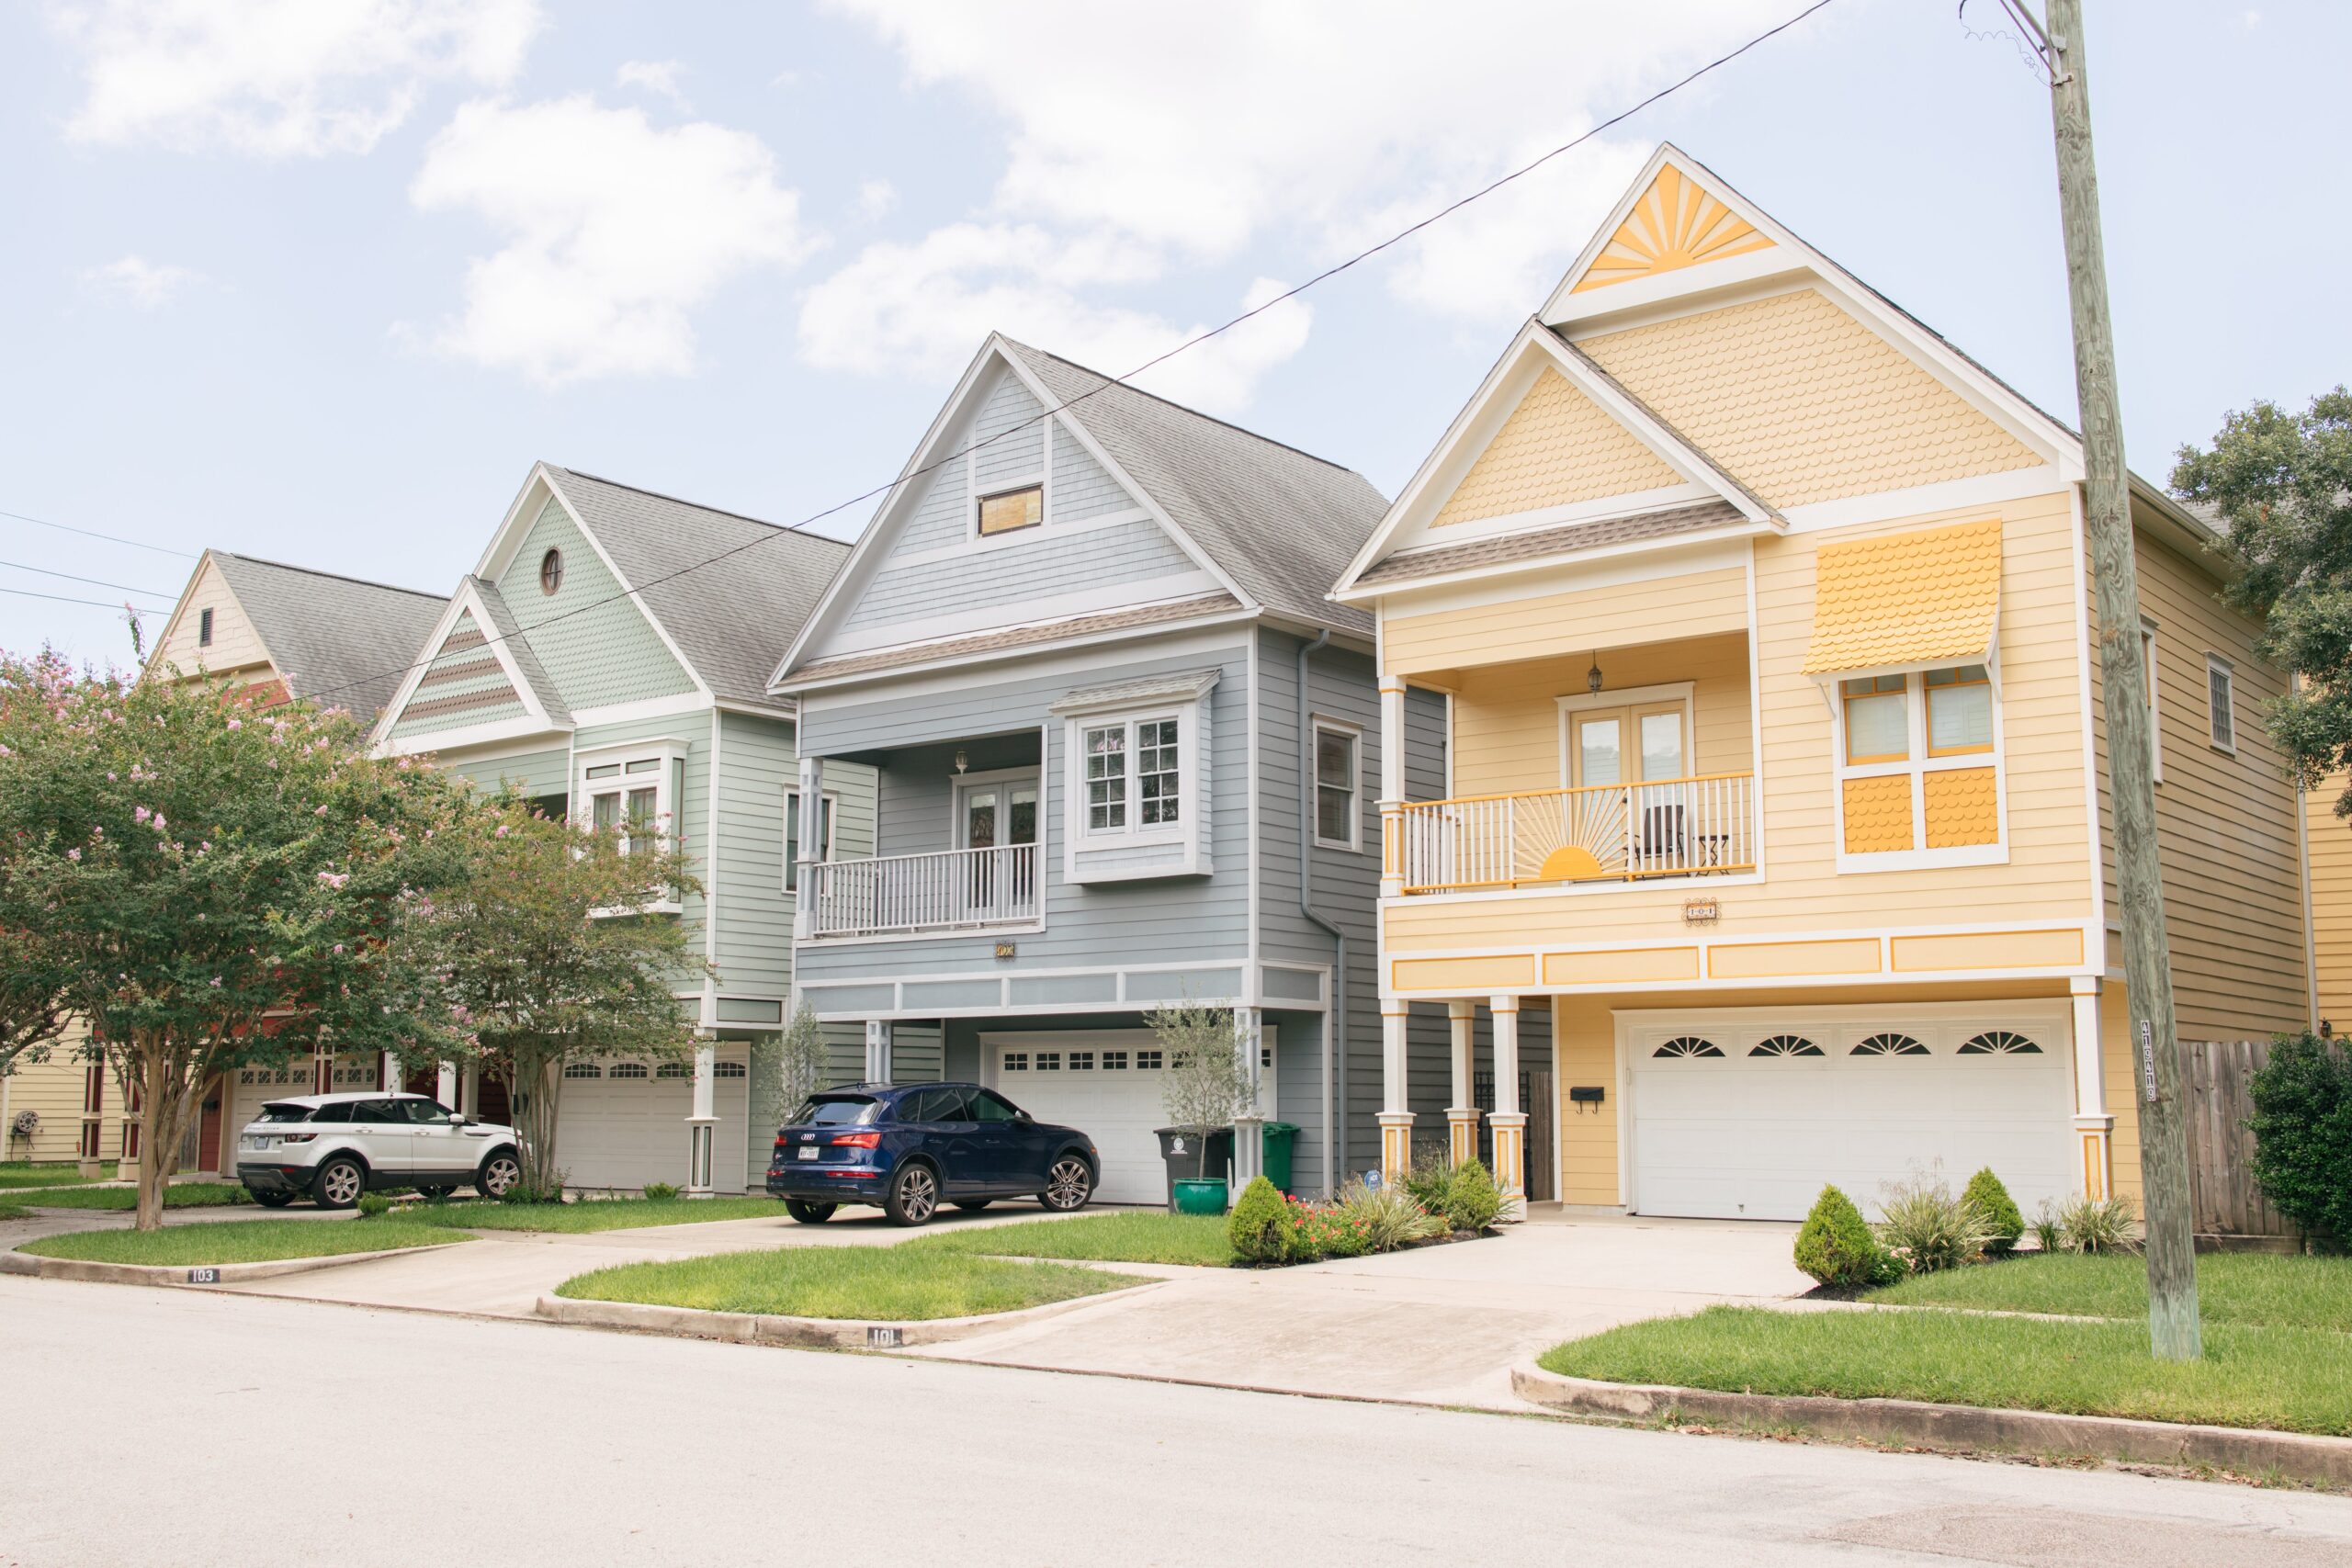 Greater Heights is one of the best places to live in Houston. Right outside of downtown, this area is walkable, offers a lot of amenities and is a quiet, residential area. Pictured: Homes in a Houston neighborhood.